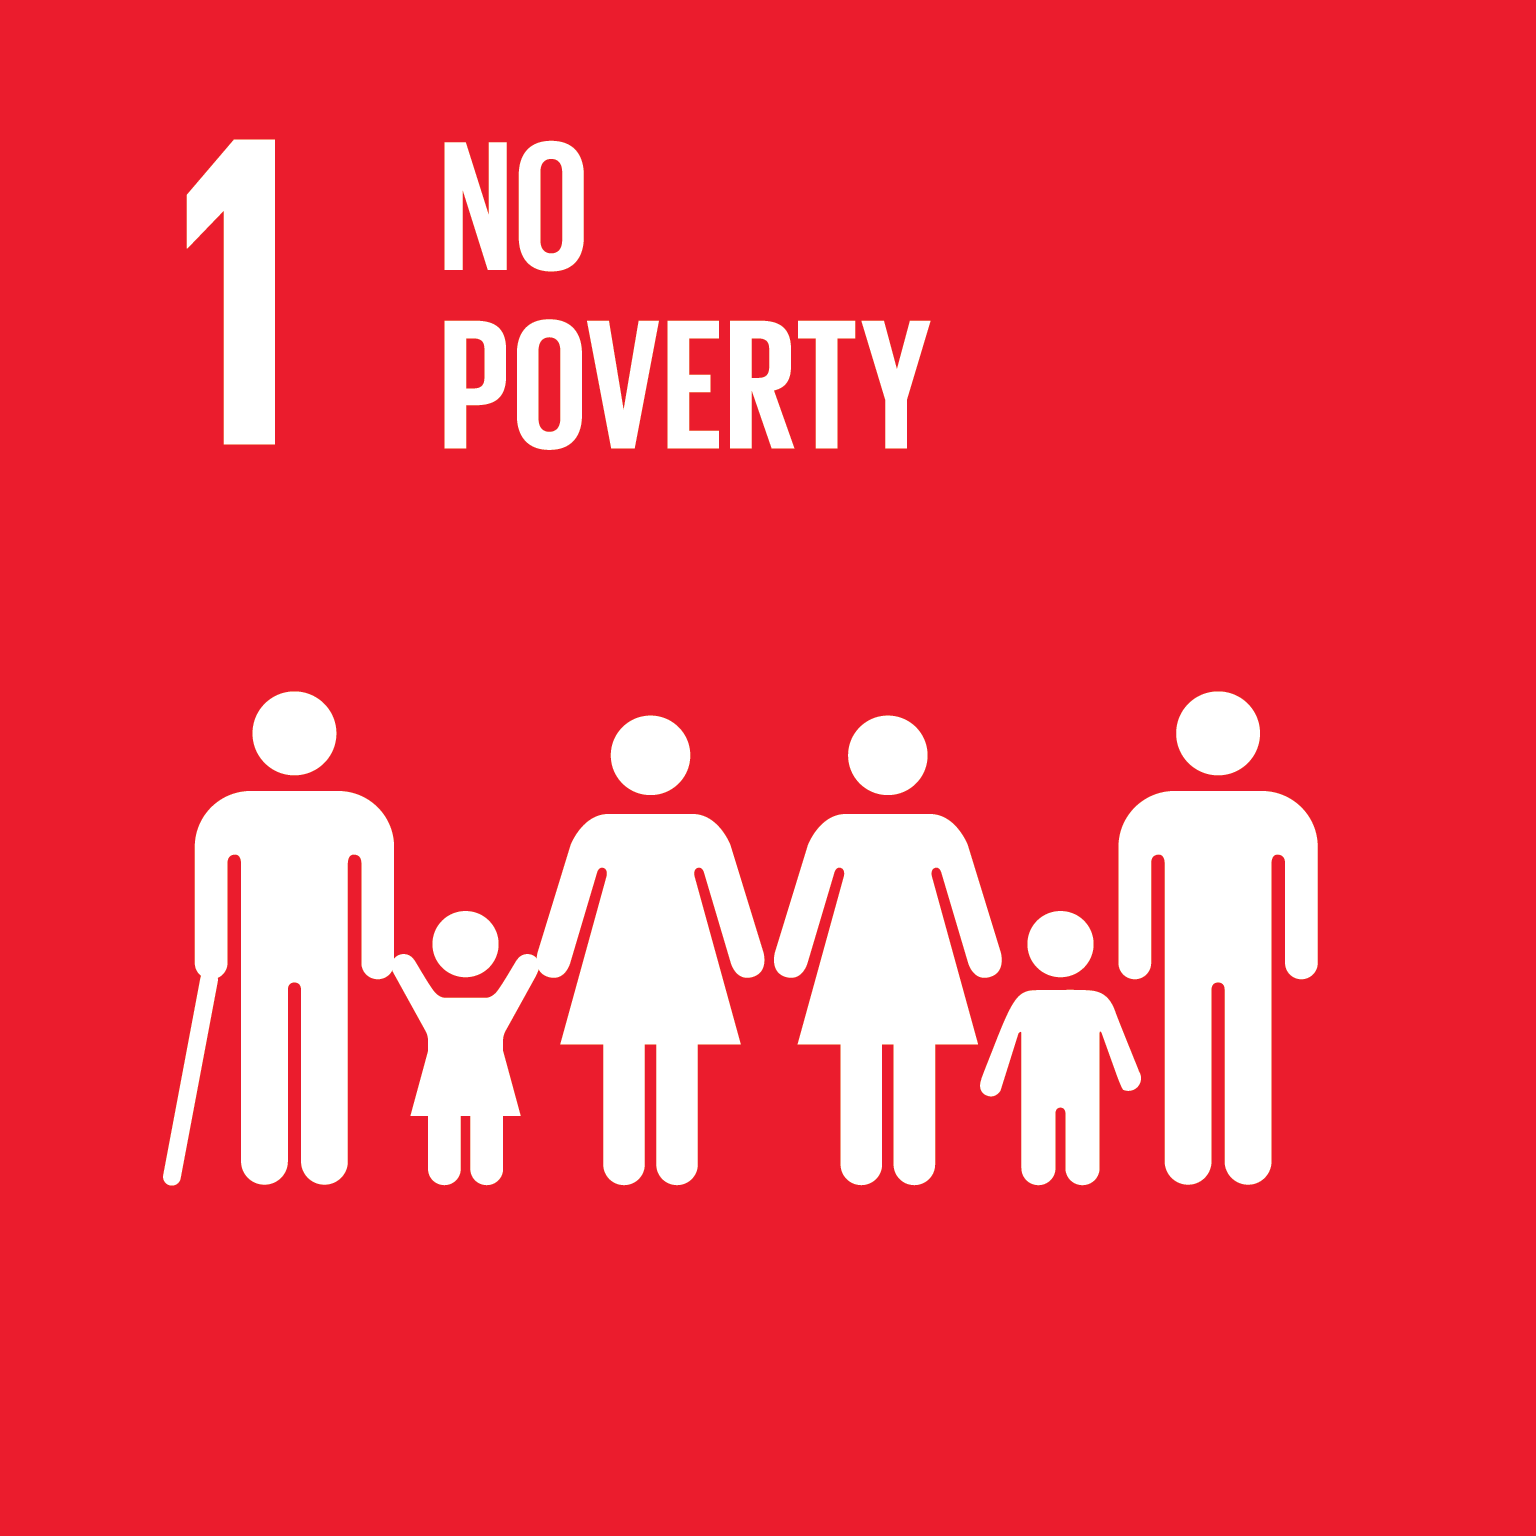 Goal 1: No Poverty, the text of this infographic is listed below